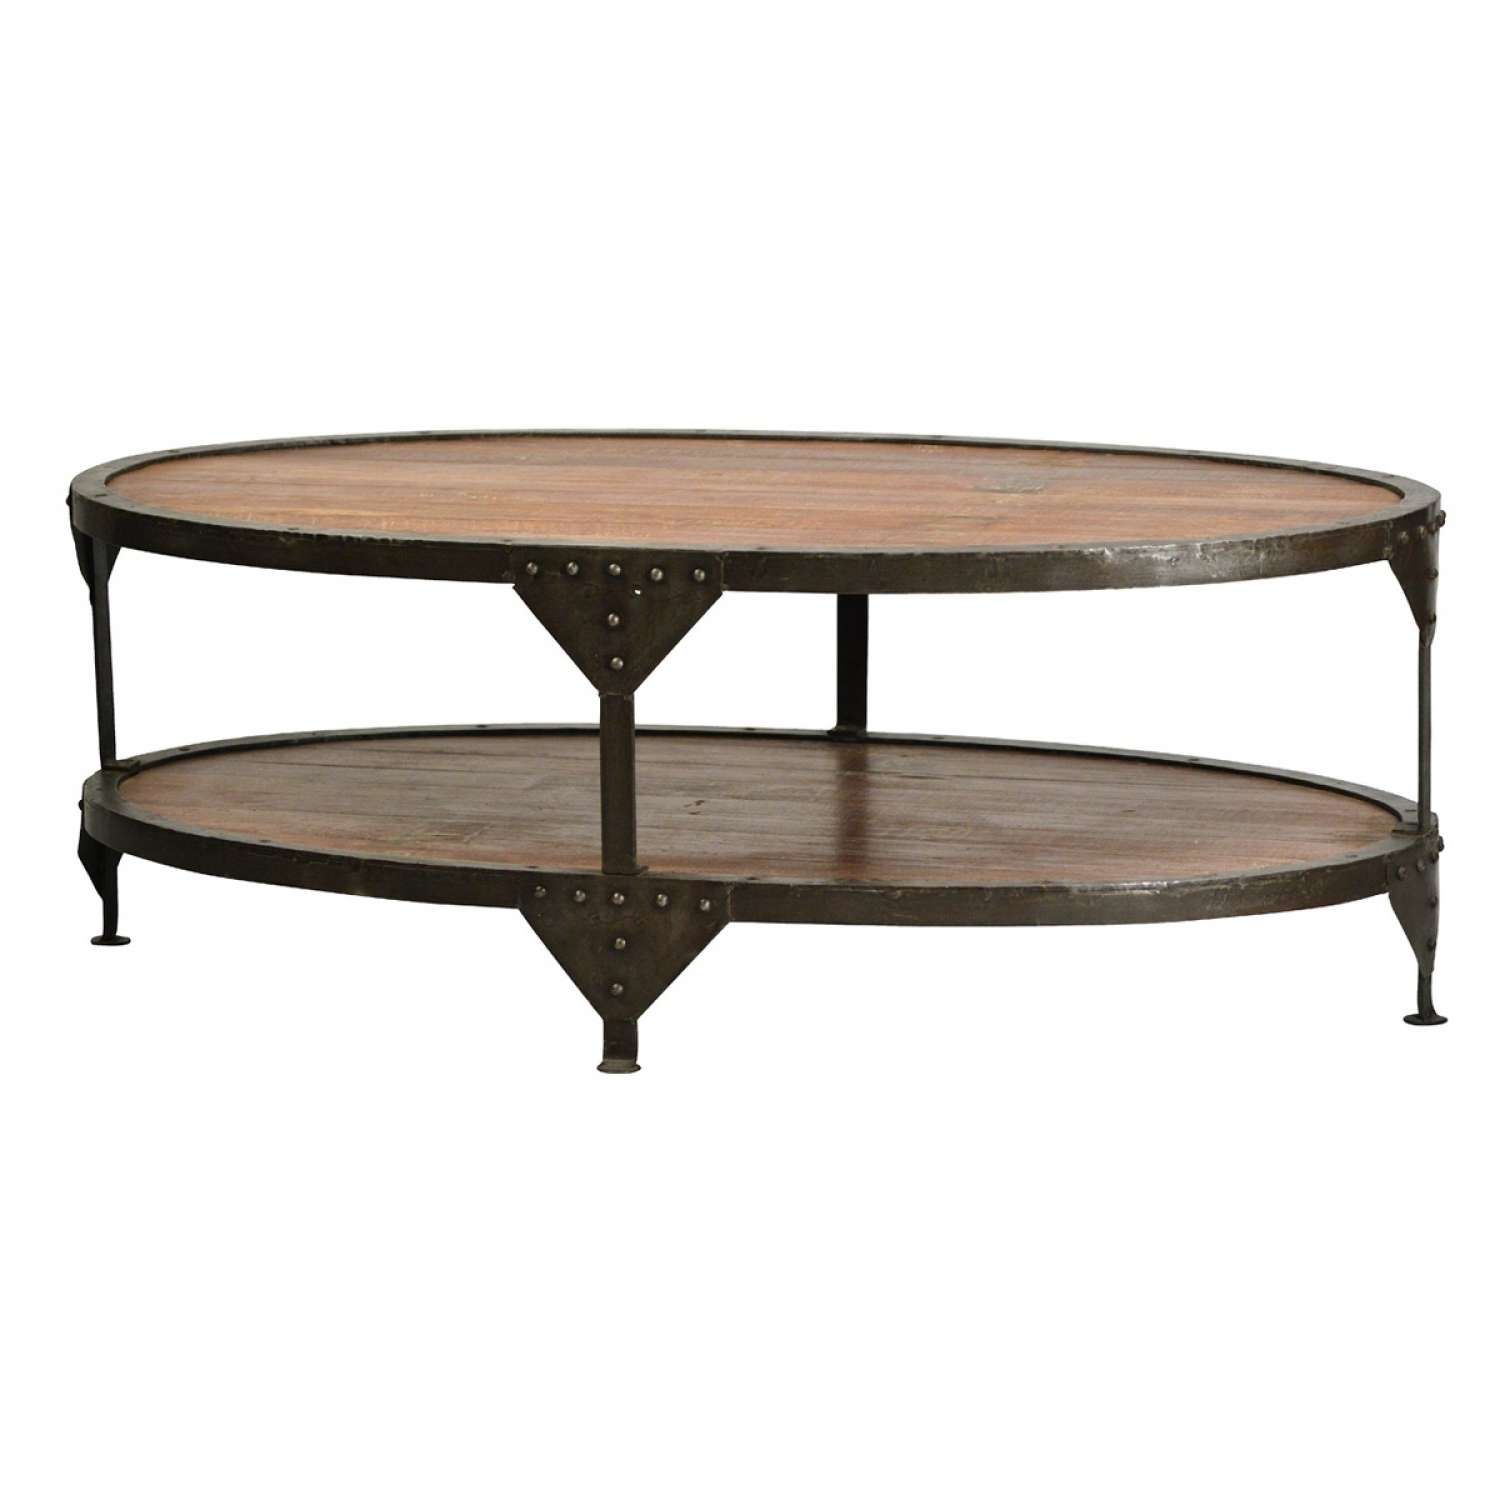 Coffee Tables : Wood Table For Wonderful Oval Wood Coffee Oval With Regard To Preferred Oval Wooden Coffee Tables (View 16 of 20)